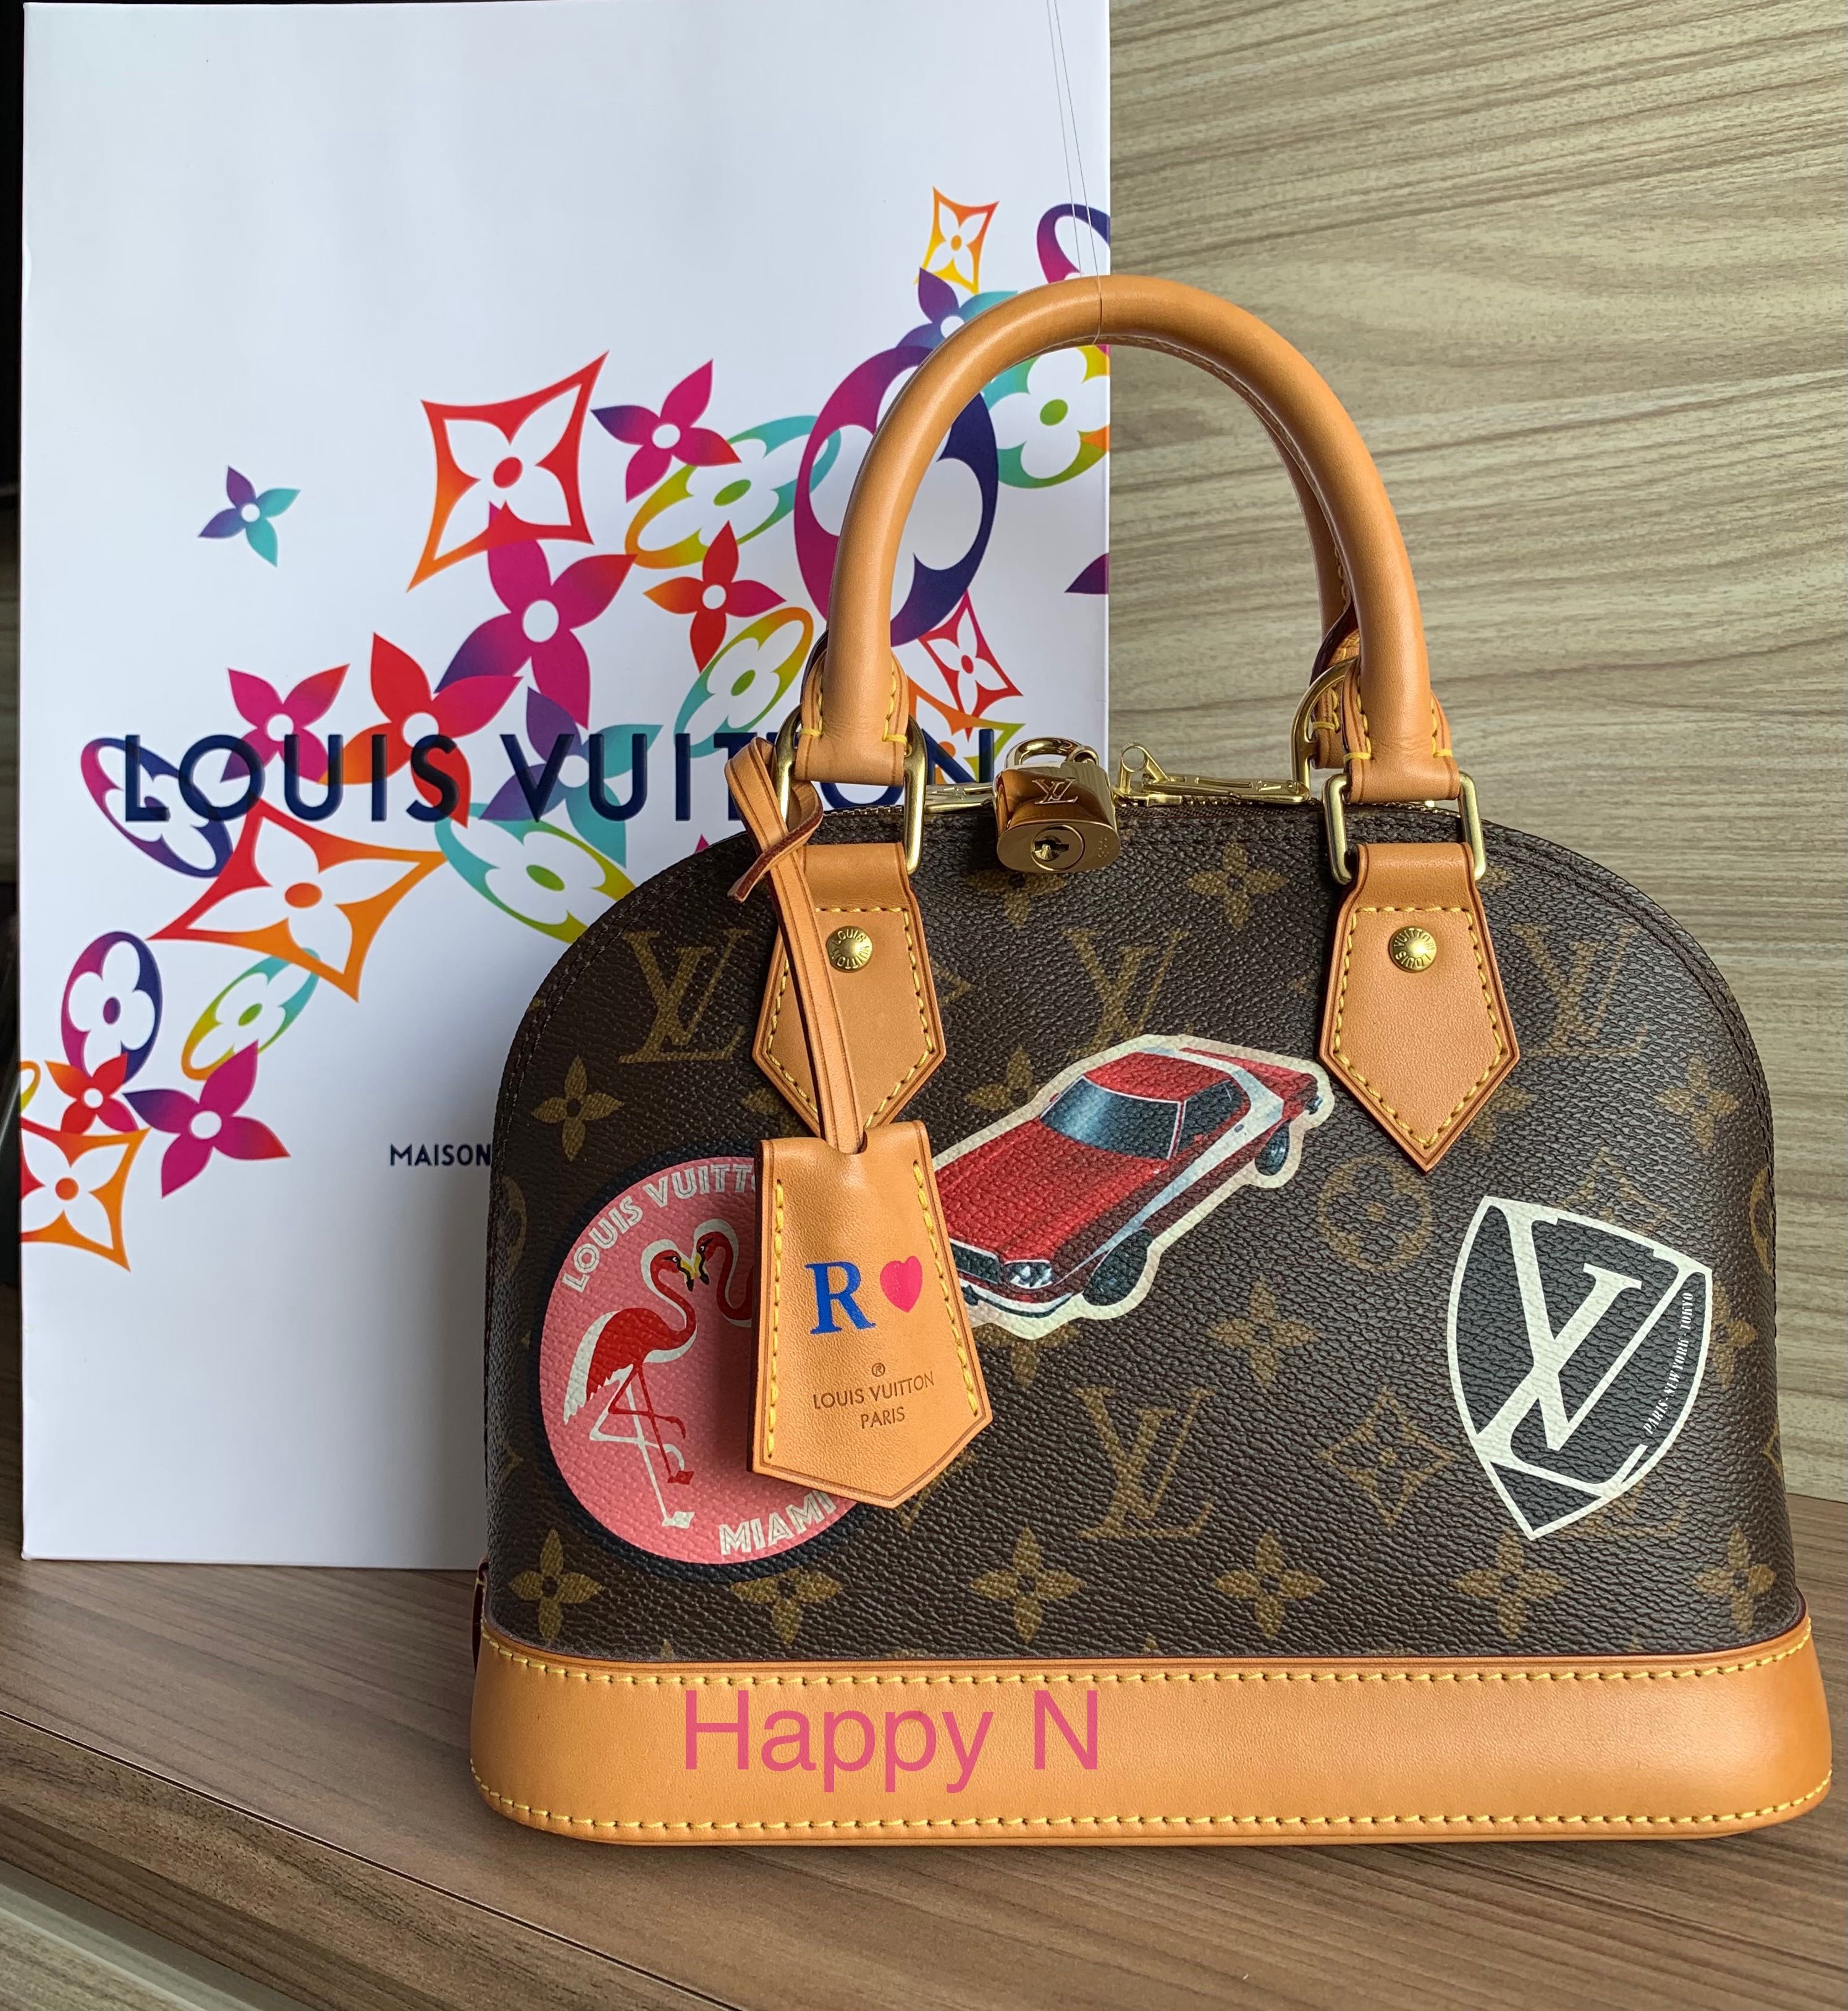 LOUIS VUITTON ALMA BB MONOGRAM  WEAR AND TEAR REVIEW USED for 7